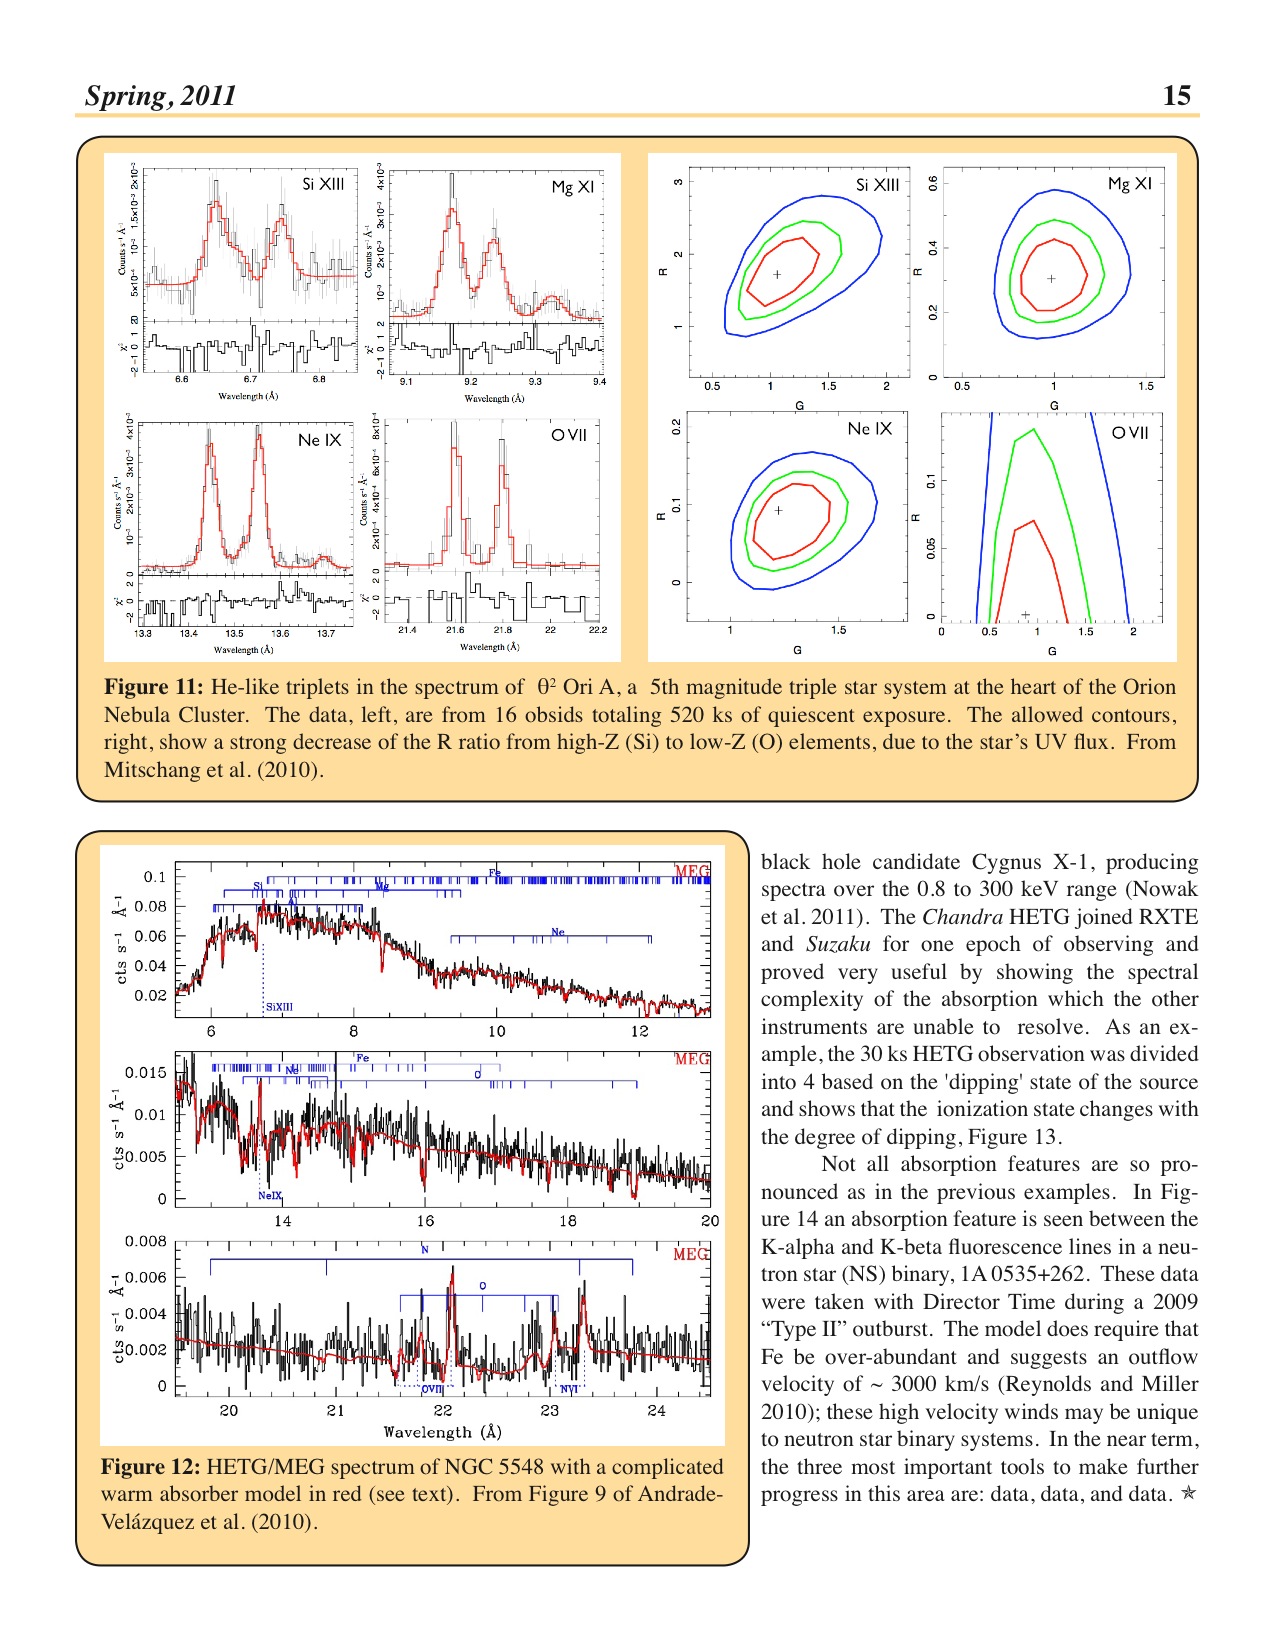 Page 15 of the Chandra Newsletter, issue 18.